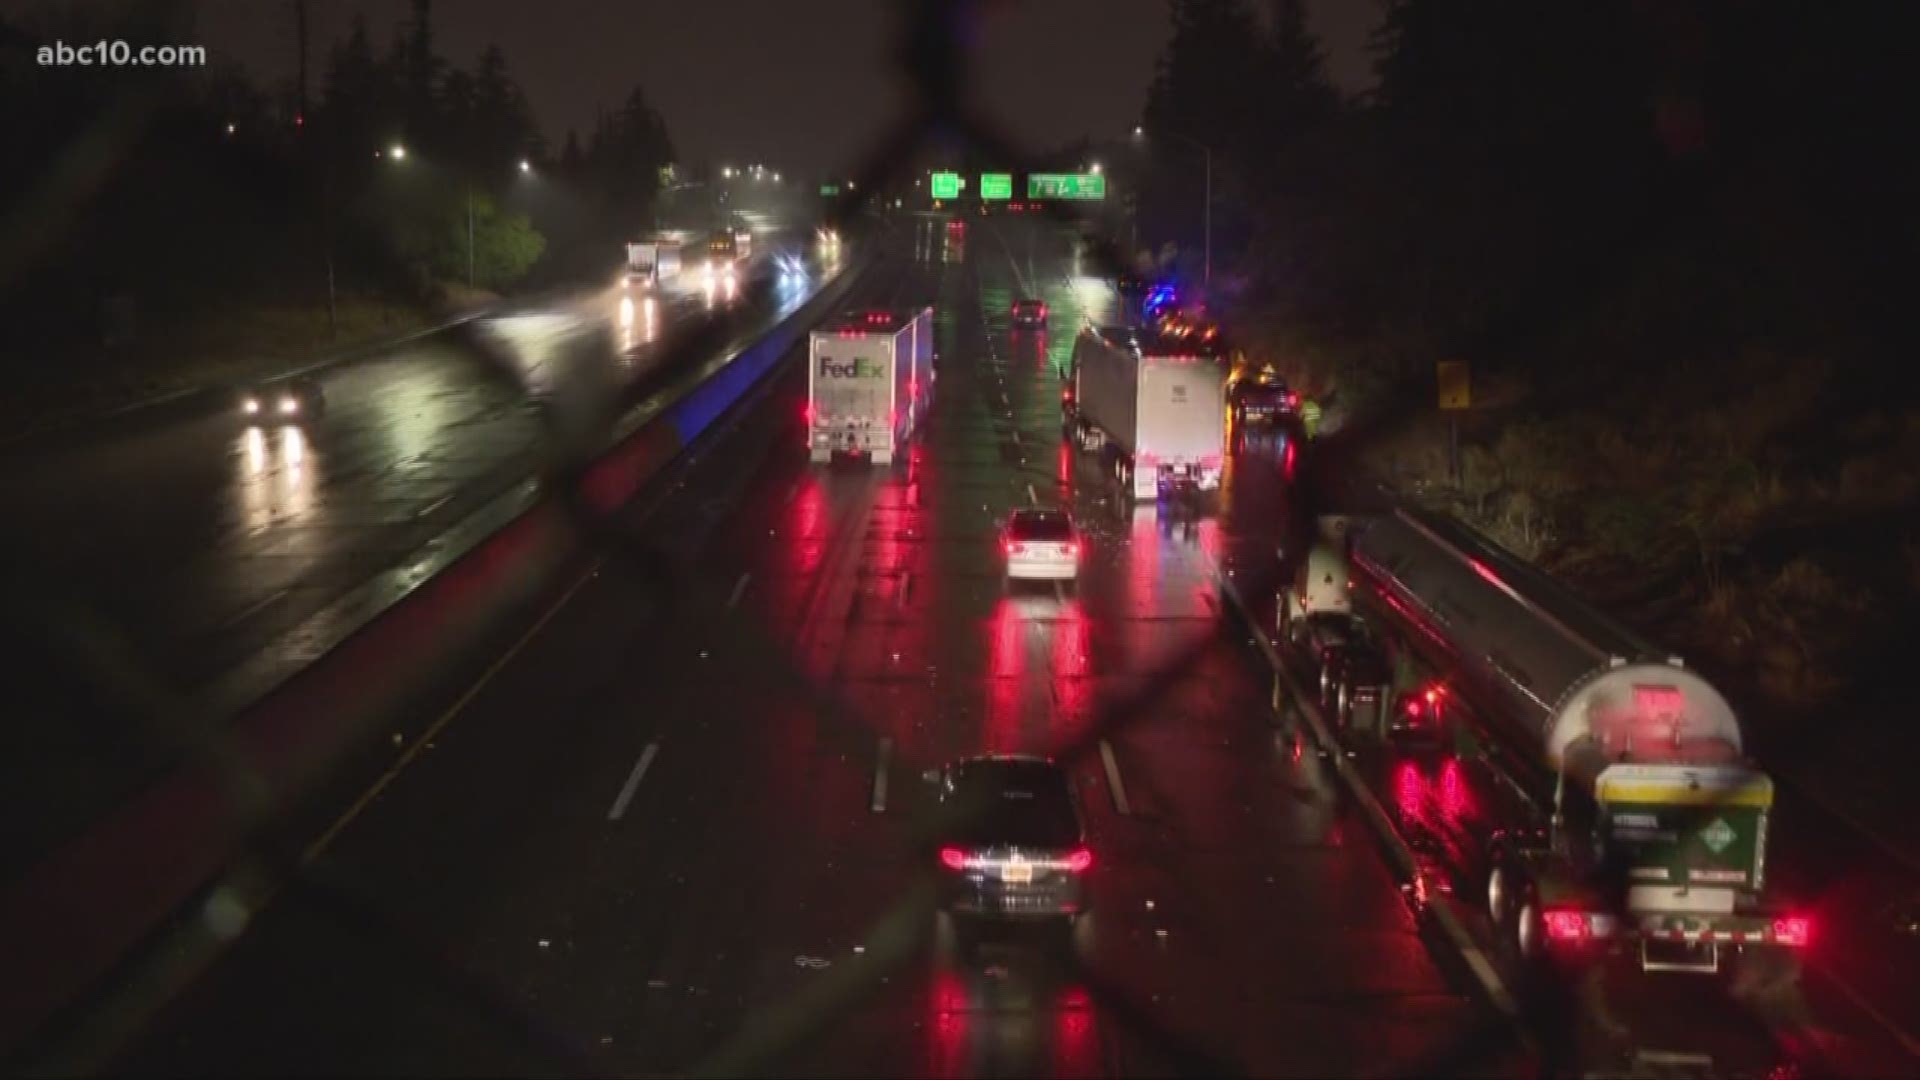 Heavy rainfall throughout the valley has led to some challenges for drivers as wet roads have caused several accidents throughout Northern California.